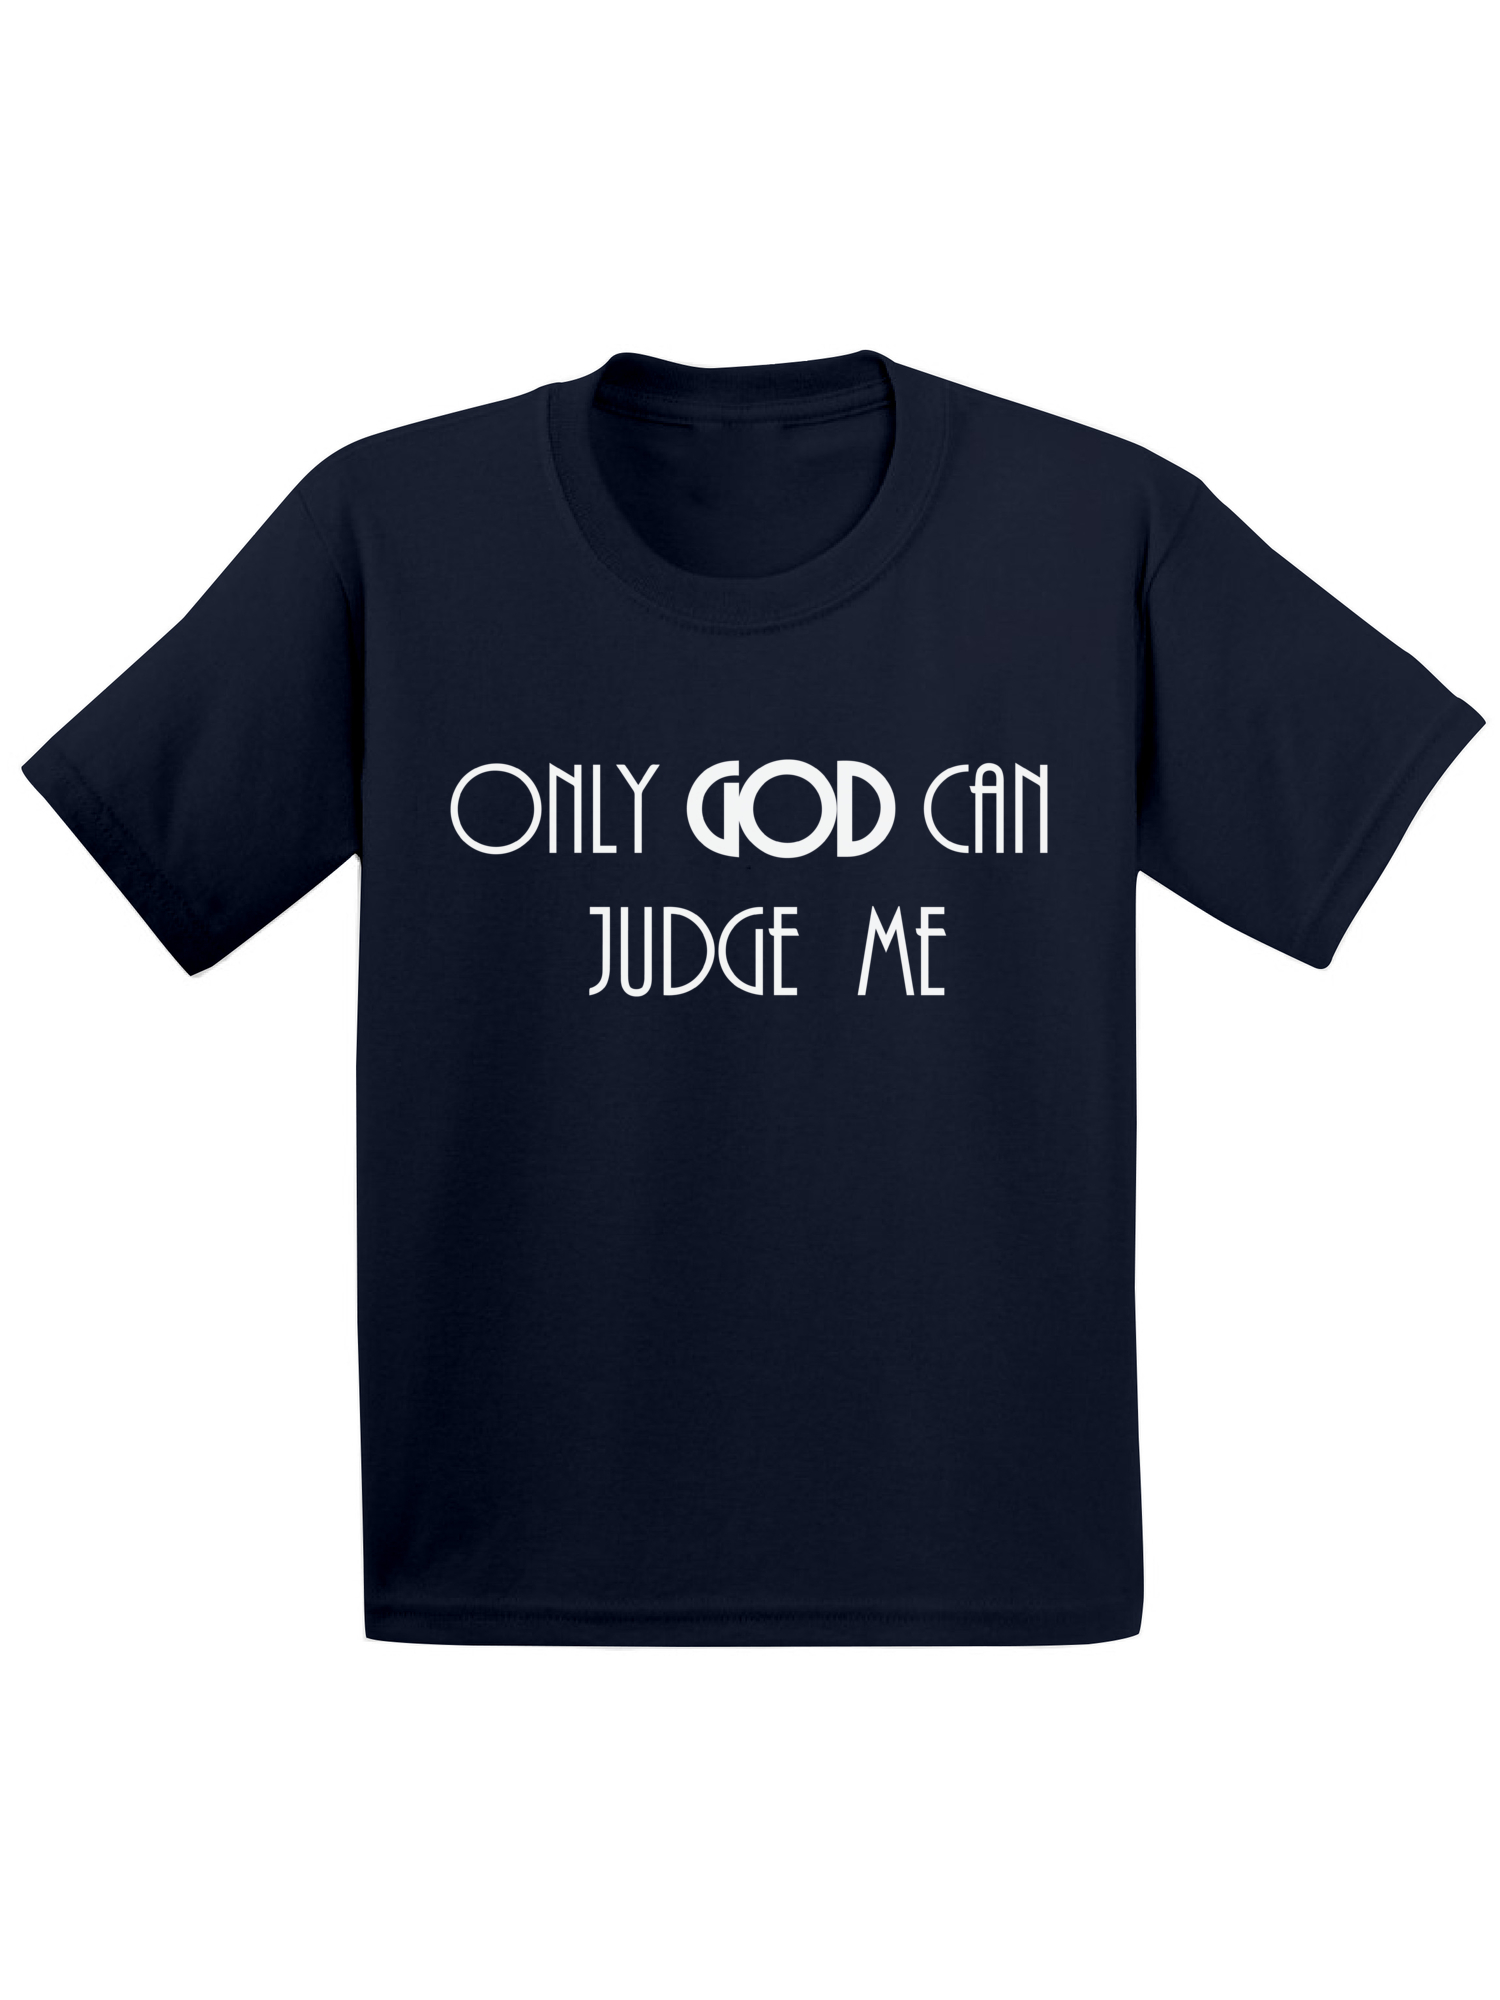 Awkward Styles Only God Can Judge Me Toddler Shirt Jesus Shirt for Kids T Shirt for Boys Christian Shirts for Girls Jesus T-Shirt for Children Christ Clothes Only God Can Judge Me T-Shirt for Toddlers - image 1 of 4